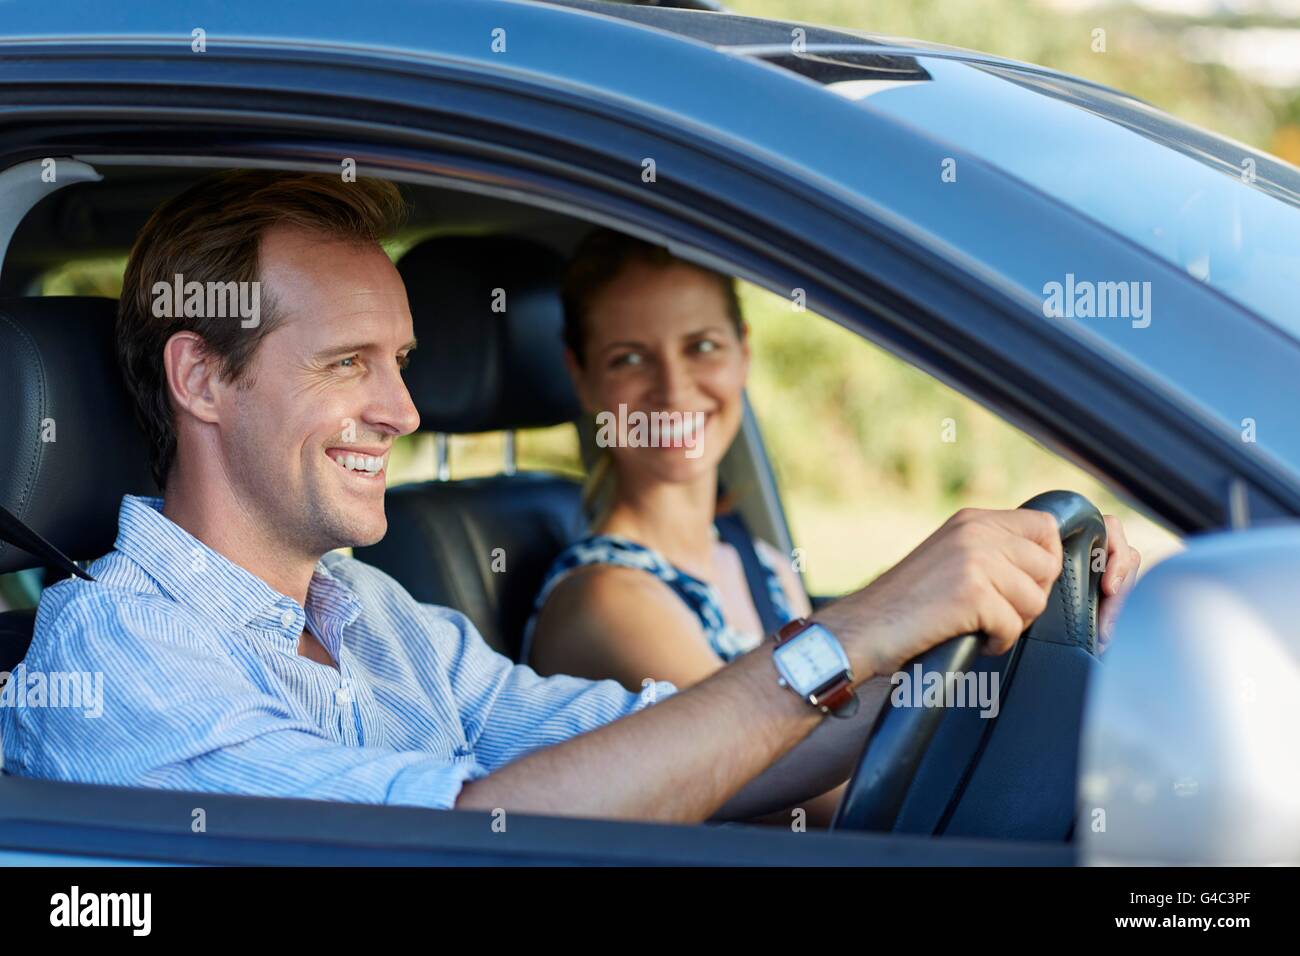 MODEL RELEASED. Couple driving in car, smiling. Stock Photo